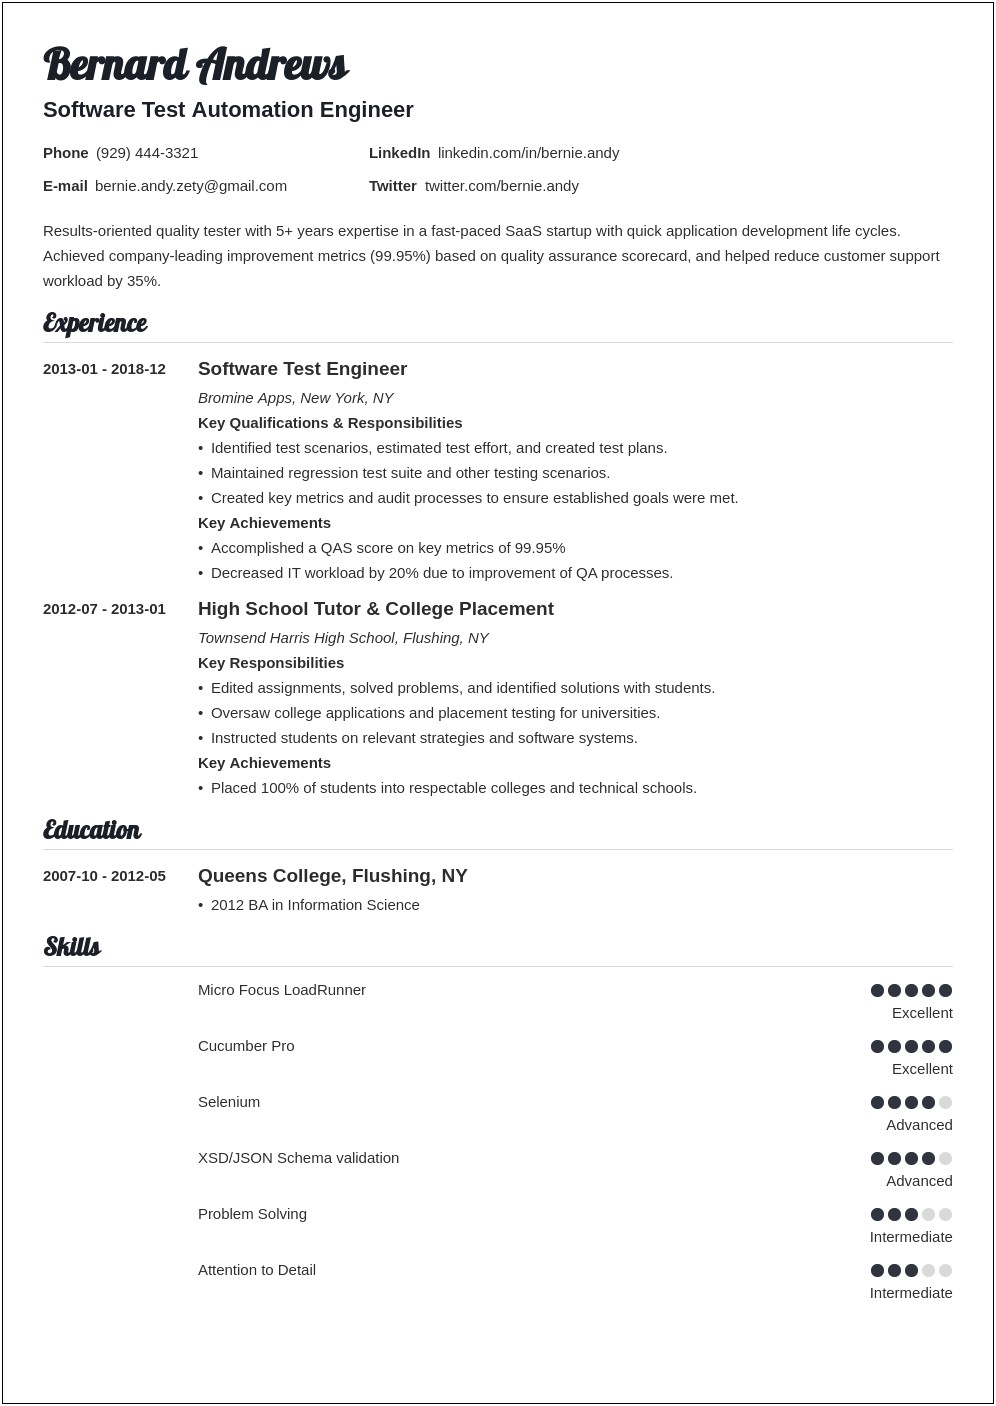 Resume Skills For Quality Assurance Manager